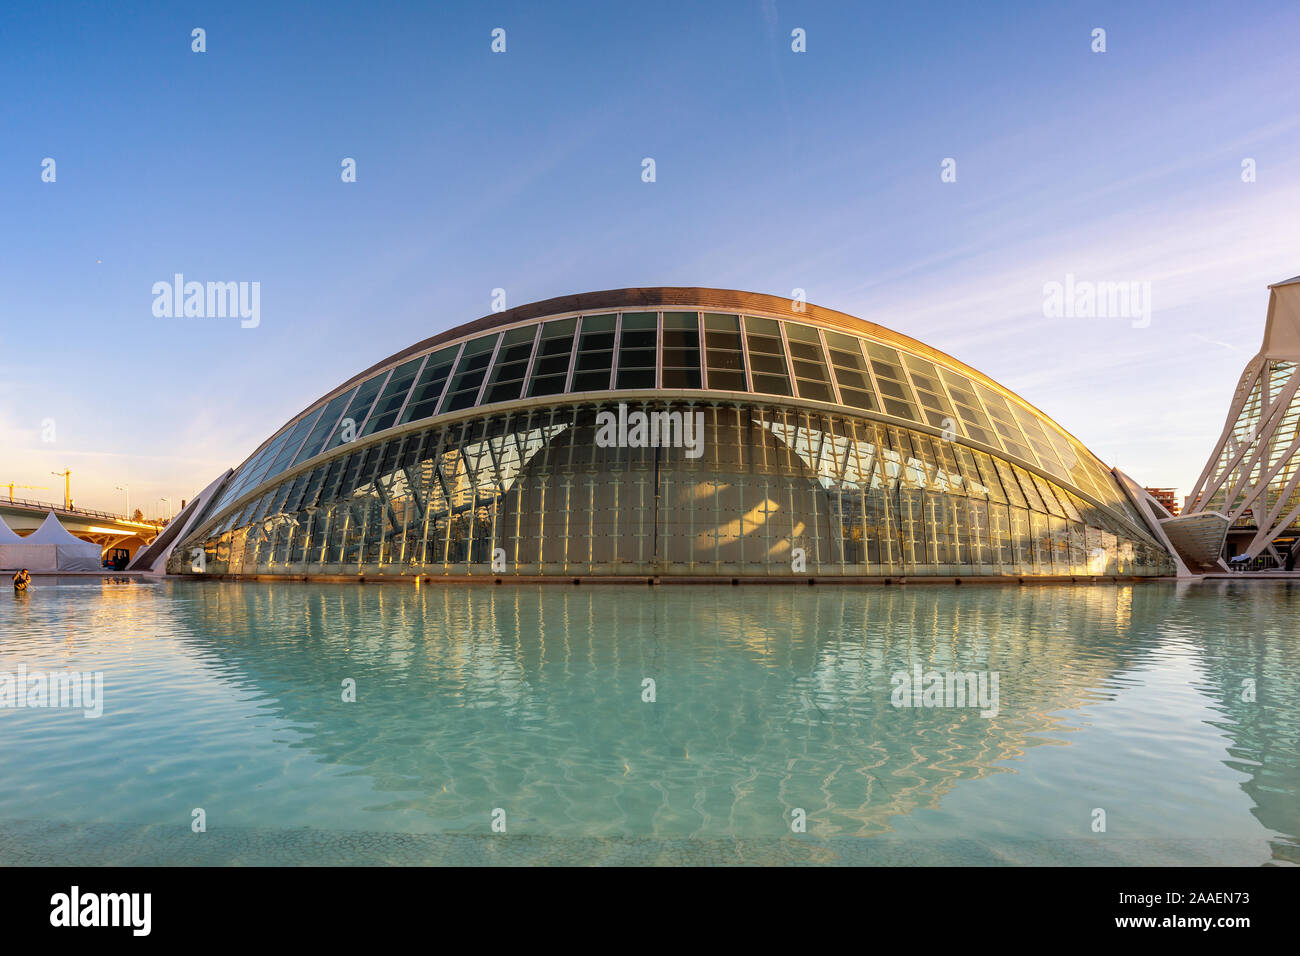 The Hemisferic IMAX cinema at the City of Arts and Sciences in the early morning, designed by Calatrava, Valencia, Spain Stock Photo